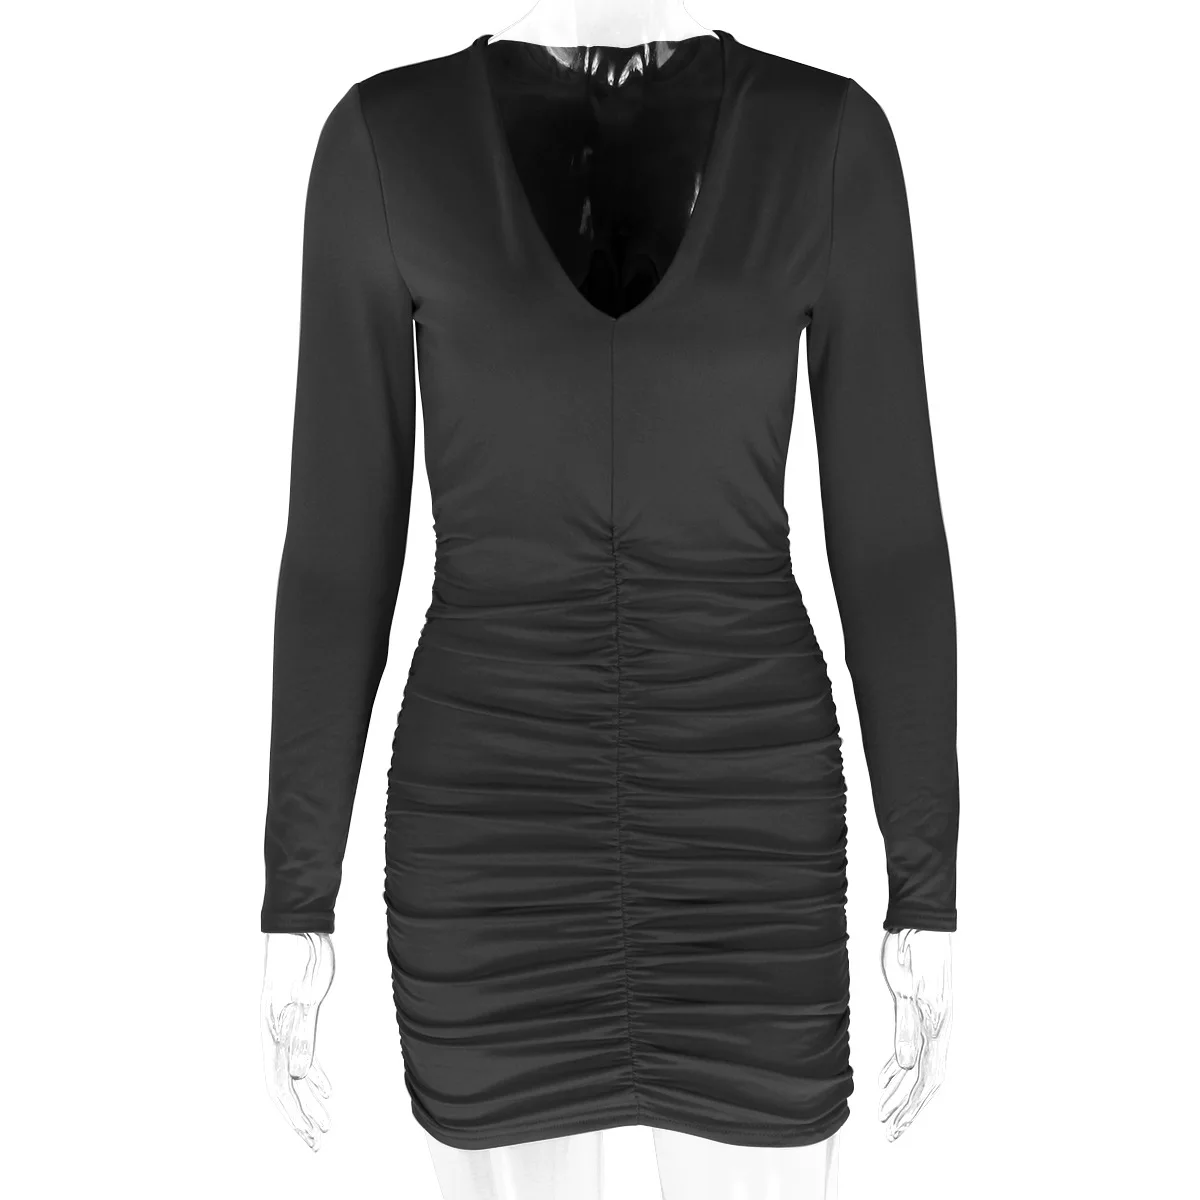 KOLLSEEY Brand  Sexy Club Party Mini Deep V Neck Pleated Bodycon 2022 Hollow Out Long Sleeve Ruched Women Dress enlarge